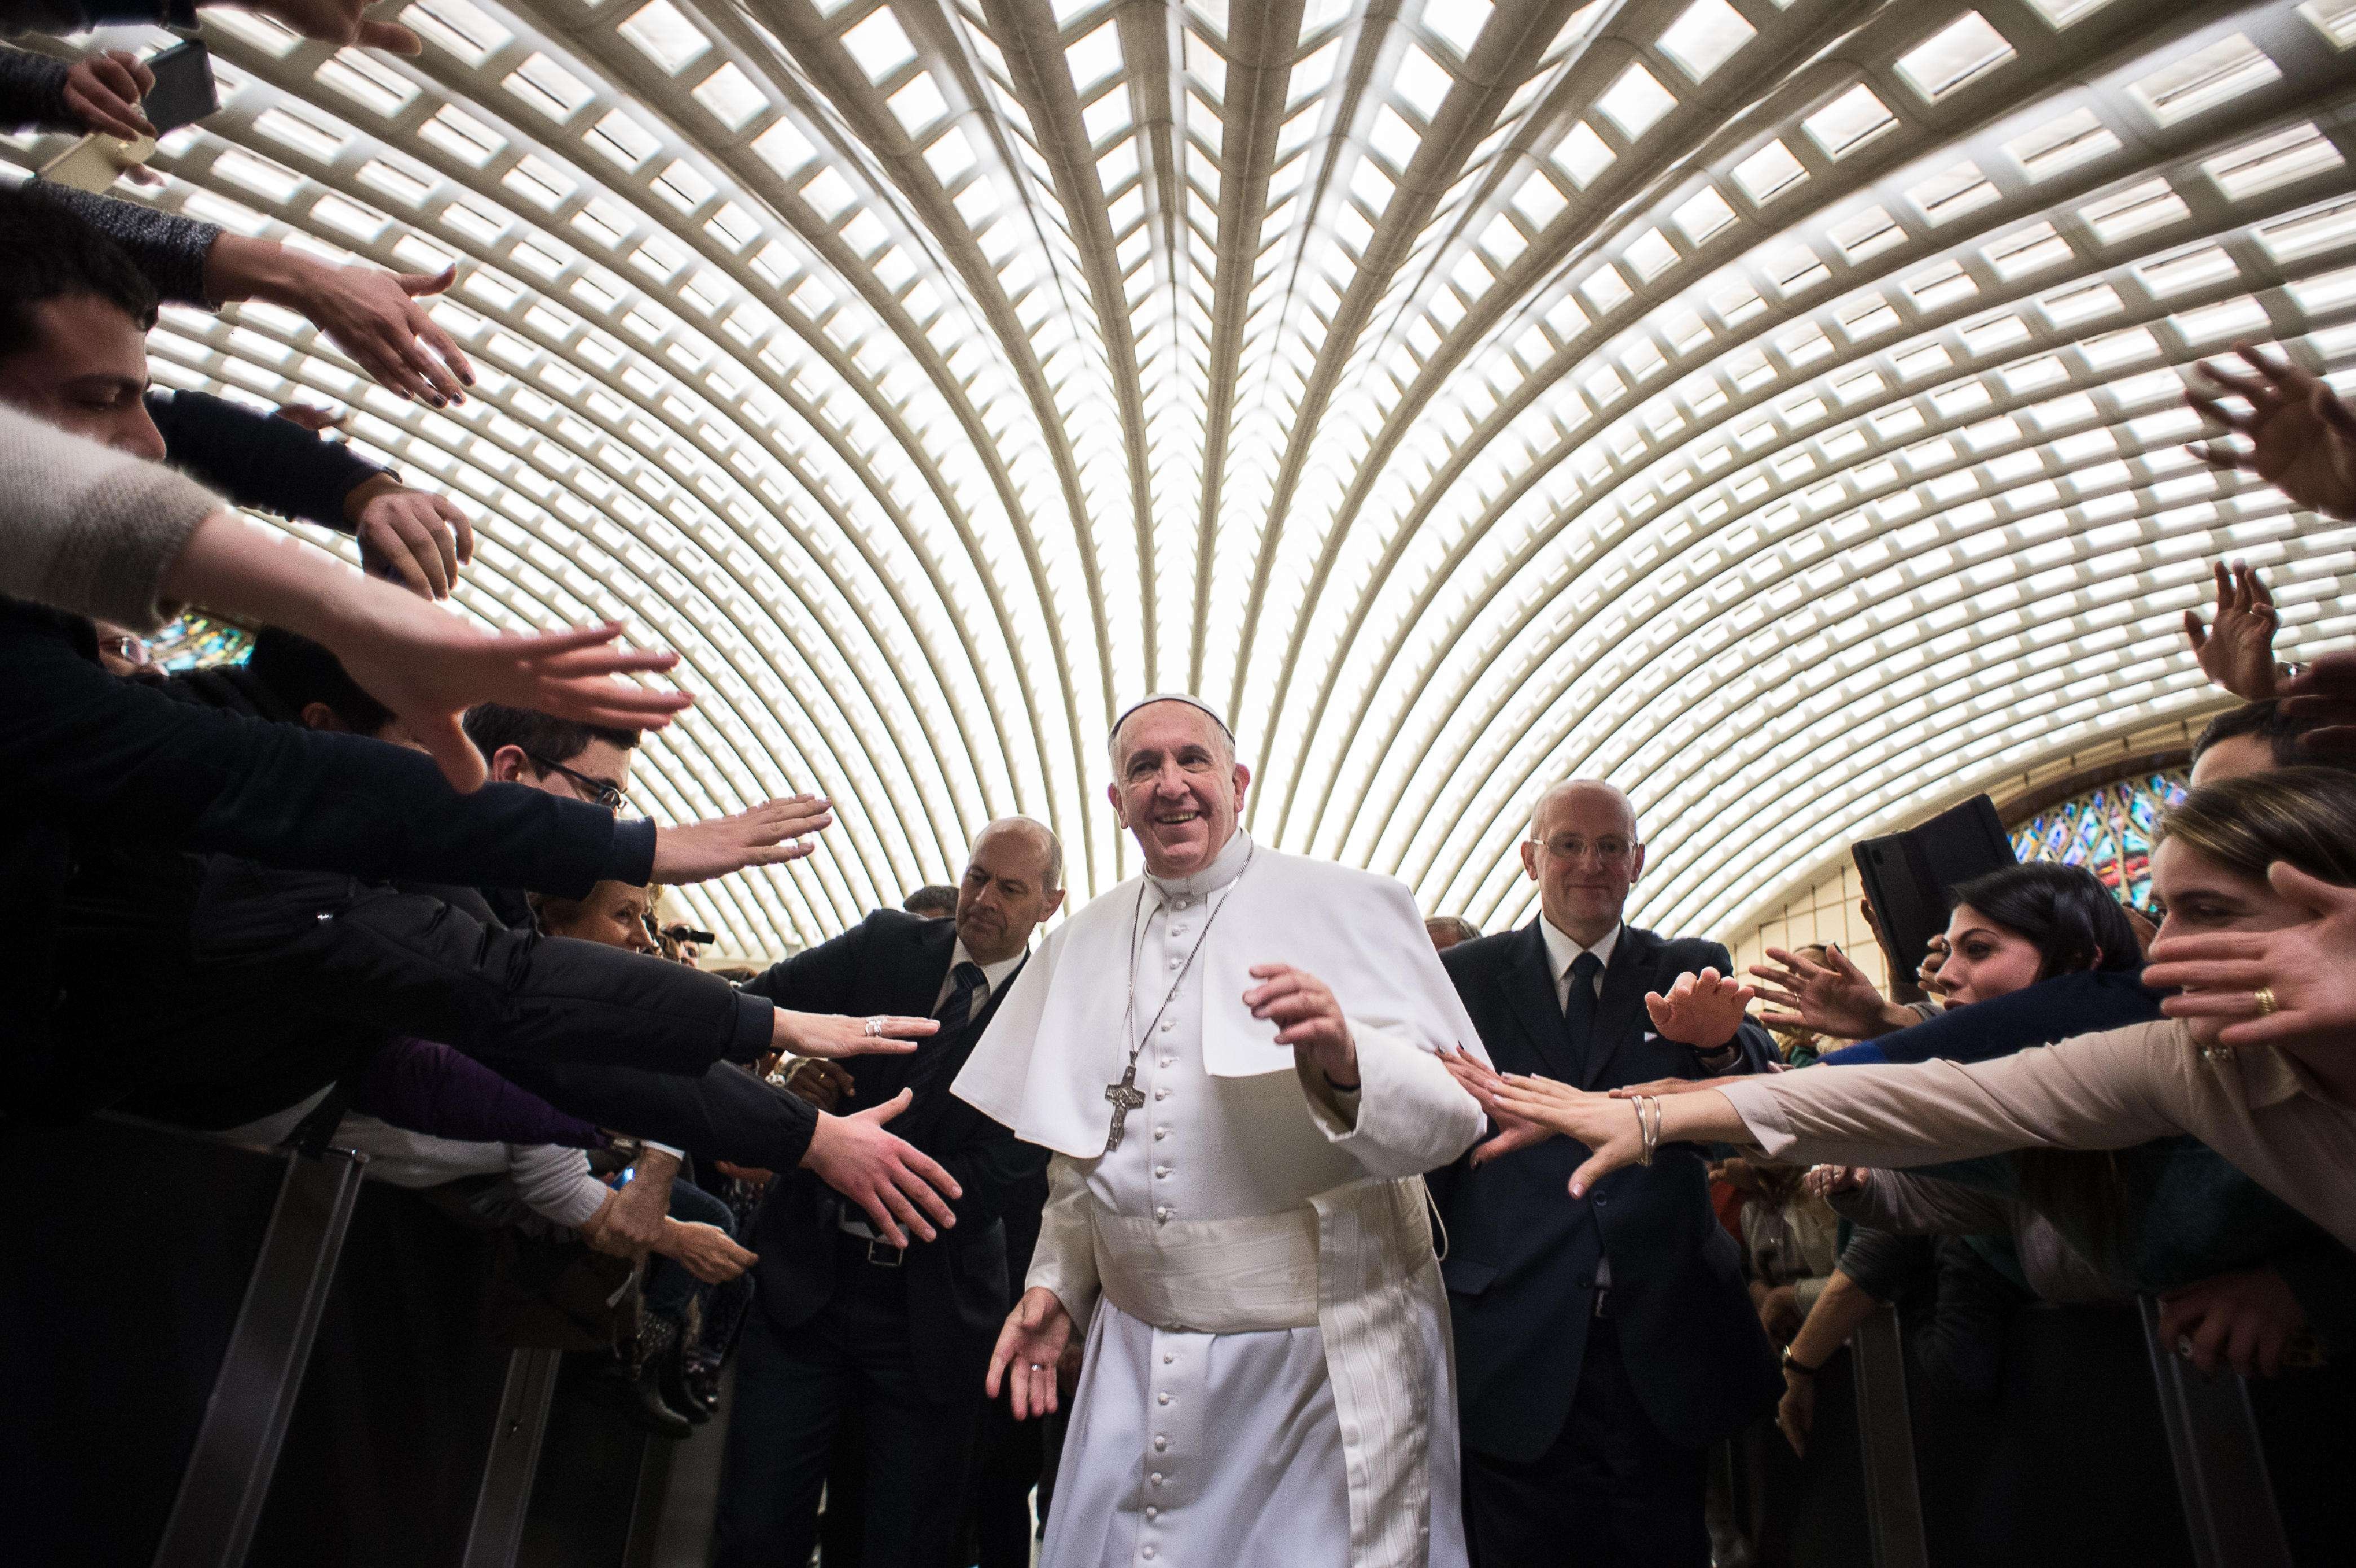 Pope Francis attends a special audience for the Cassano allo Jonio diocese at the Vatican on Feb.21, 2015.